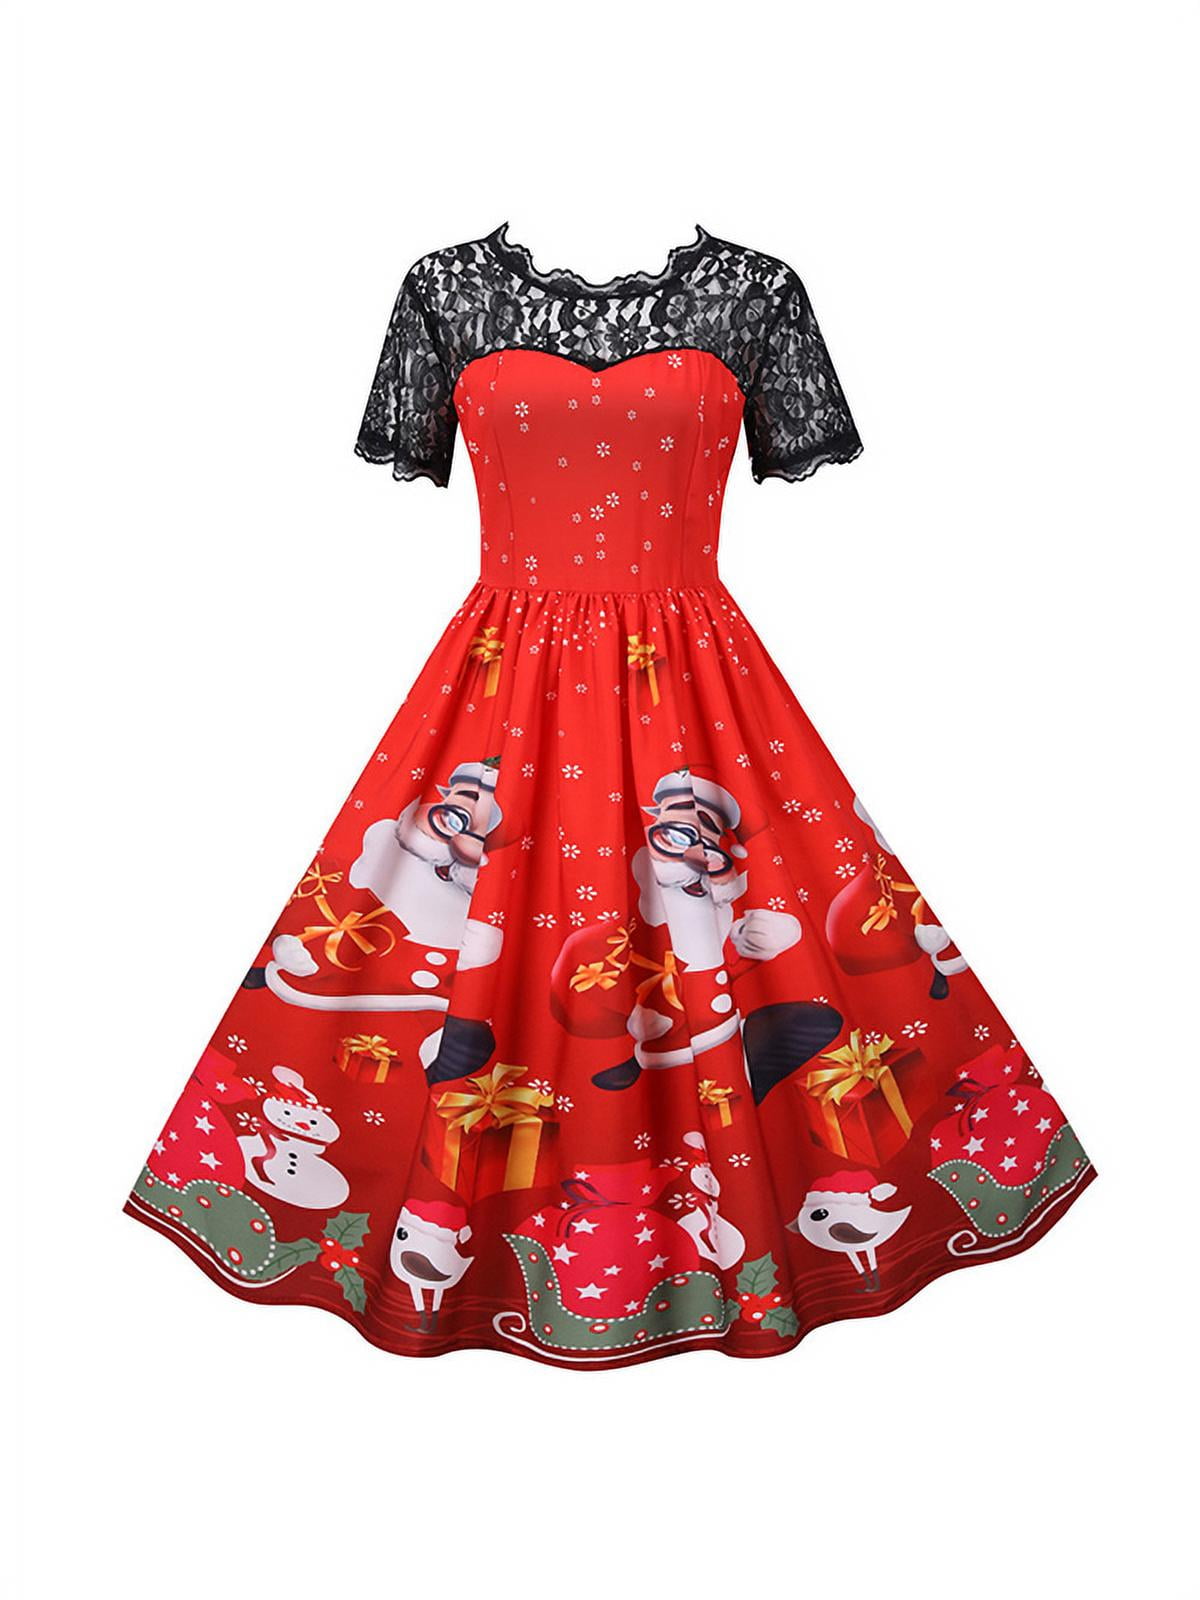 Womens Vintage Christmas O-Neck Printed Sleeveless A-Line Swing Dress+Sashes Costume Cocktail Evening Dress